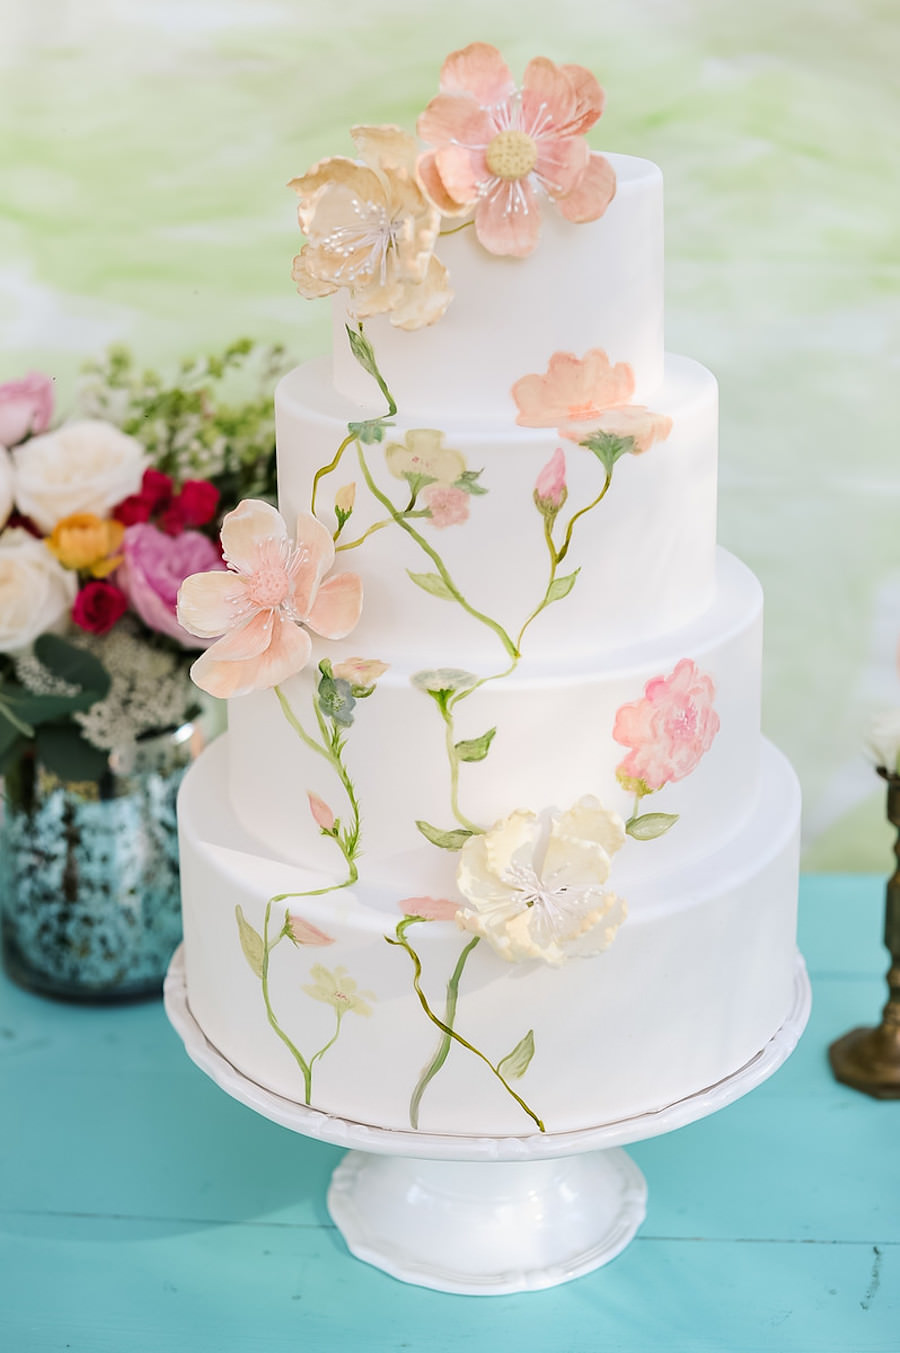 Four Tiered White Handpainted Wedding Cake with Pastel Floral Accents and Sugar Flowers | Tampa Wedding Cakes and Desserts Hands on Sweets